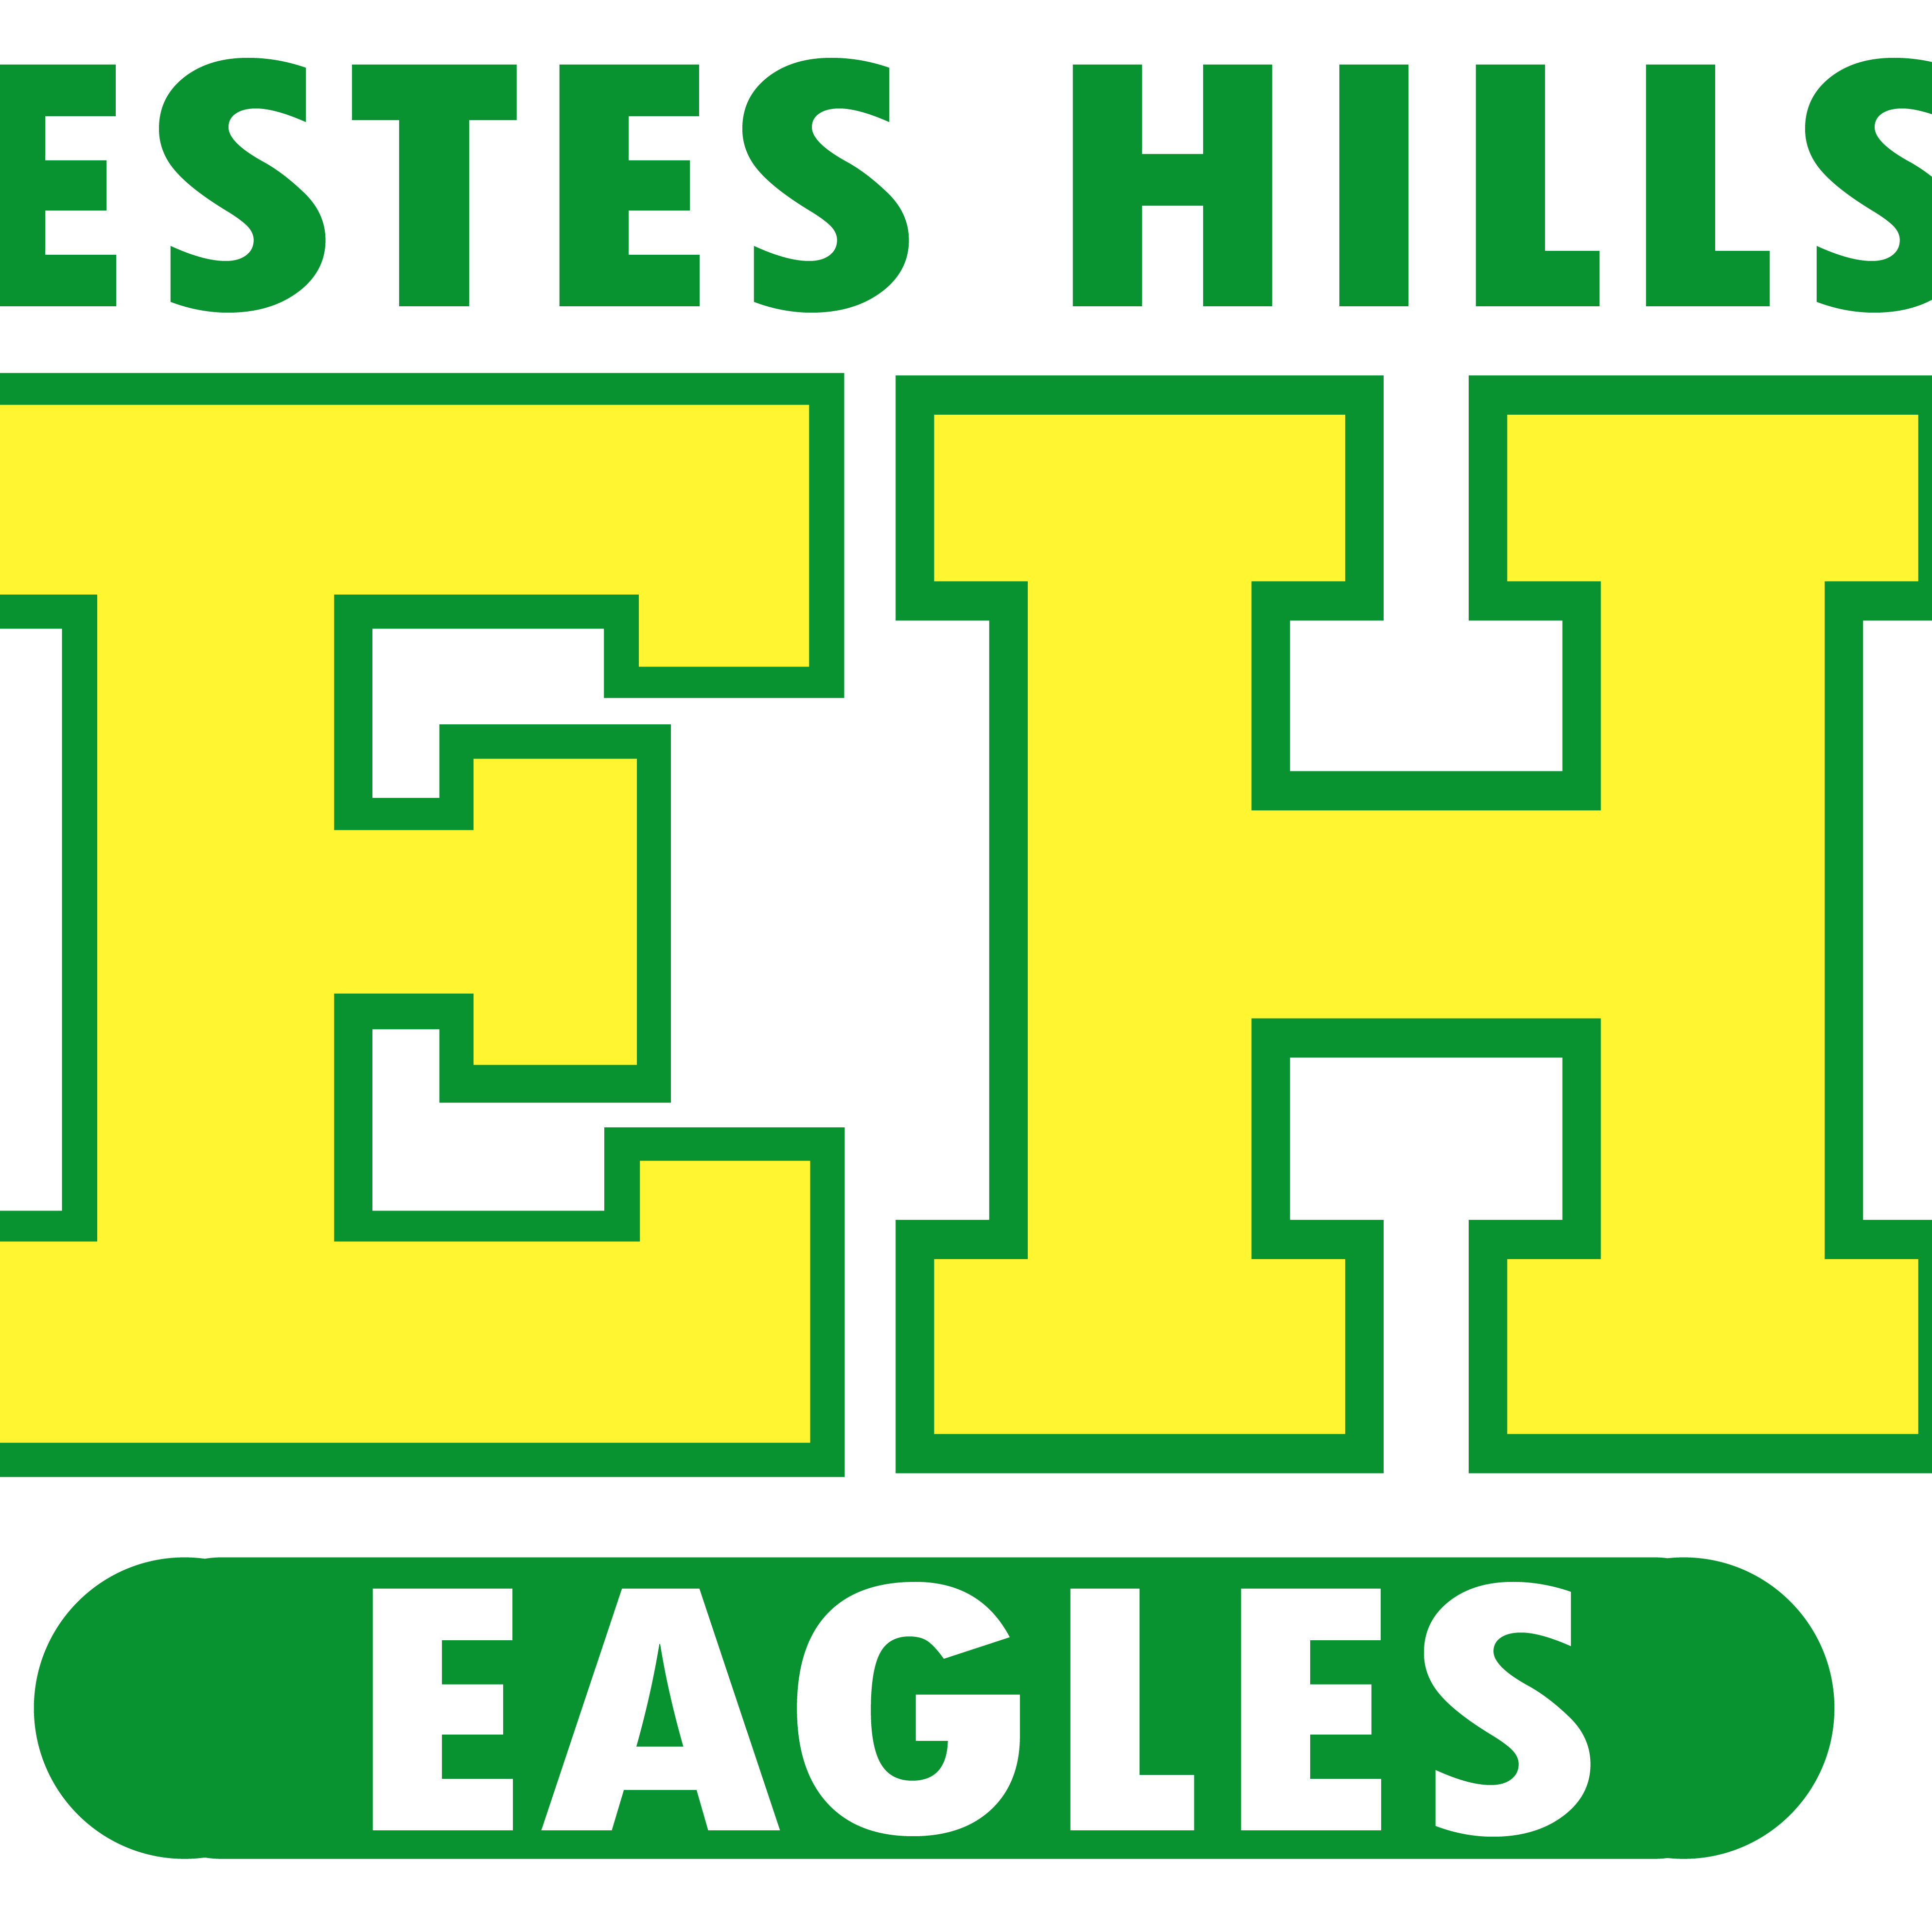 Estes Hills: Helping all students take FLIGHT so that one day they will soar!